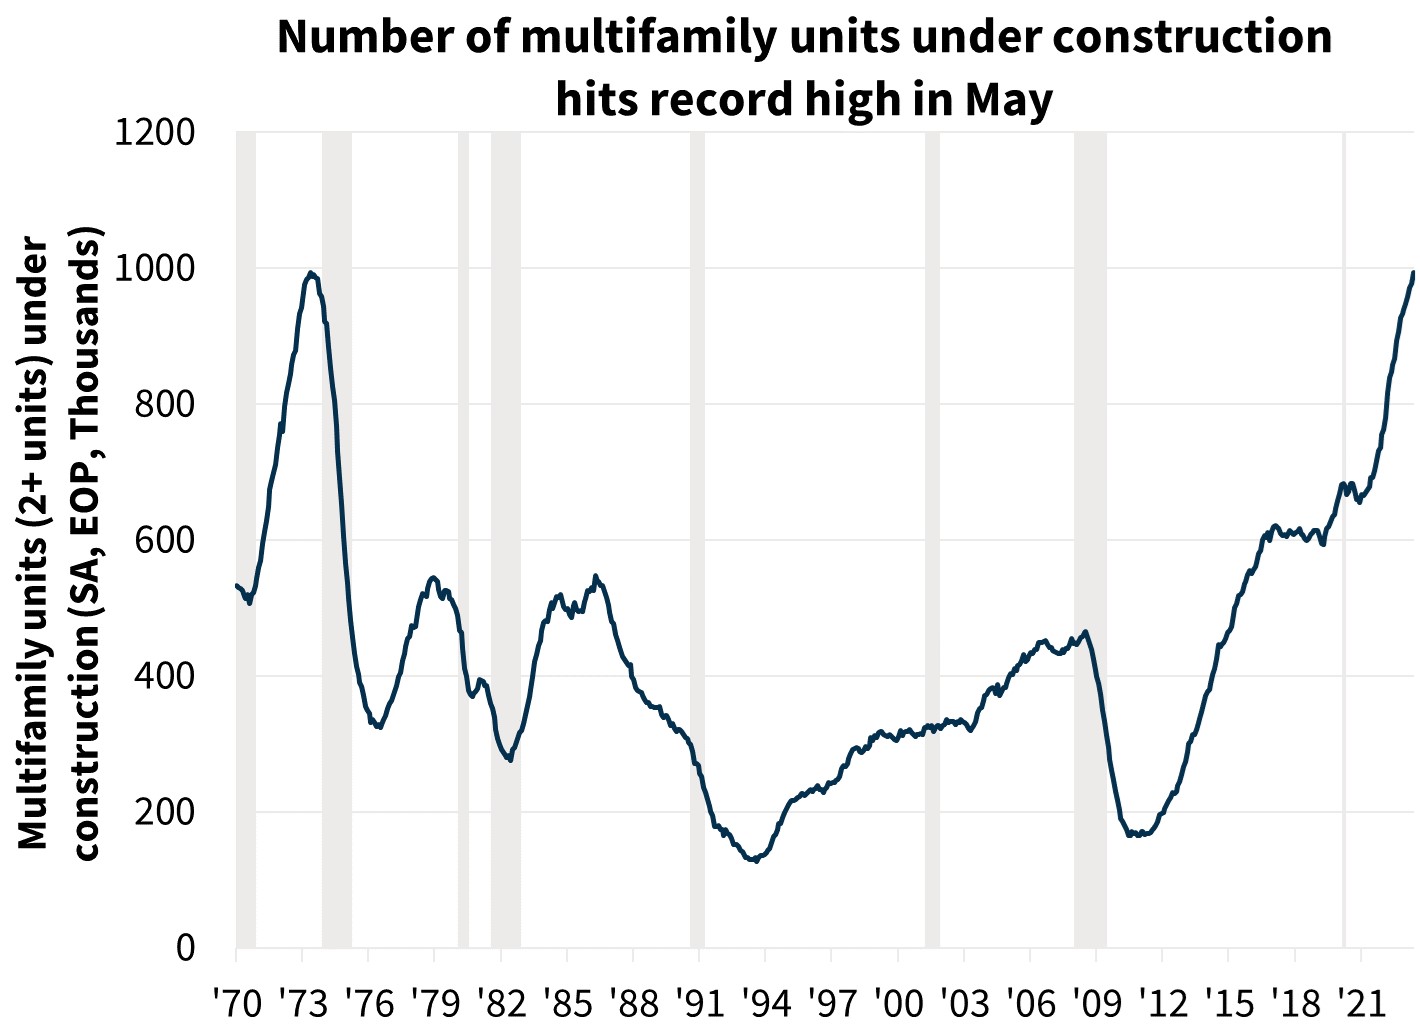  Number of multifamily units under construction hits record high in May 